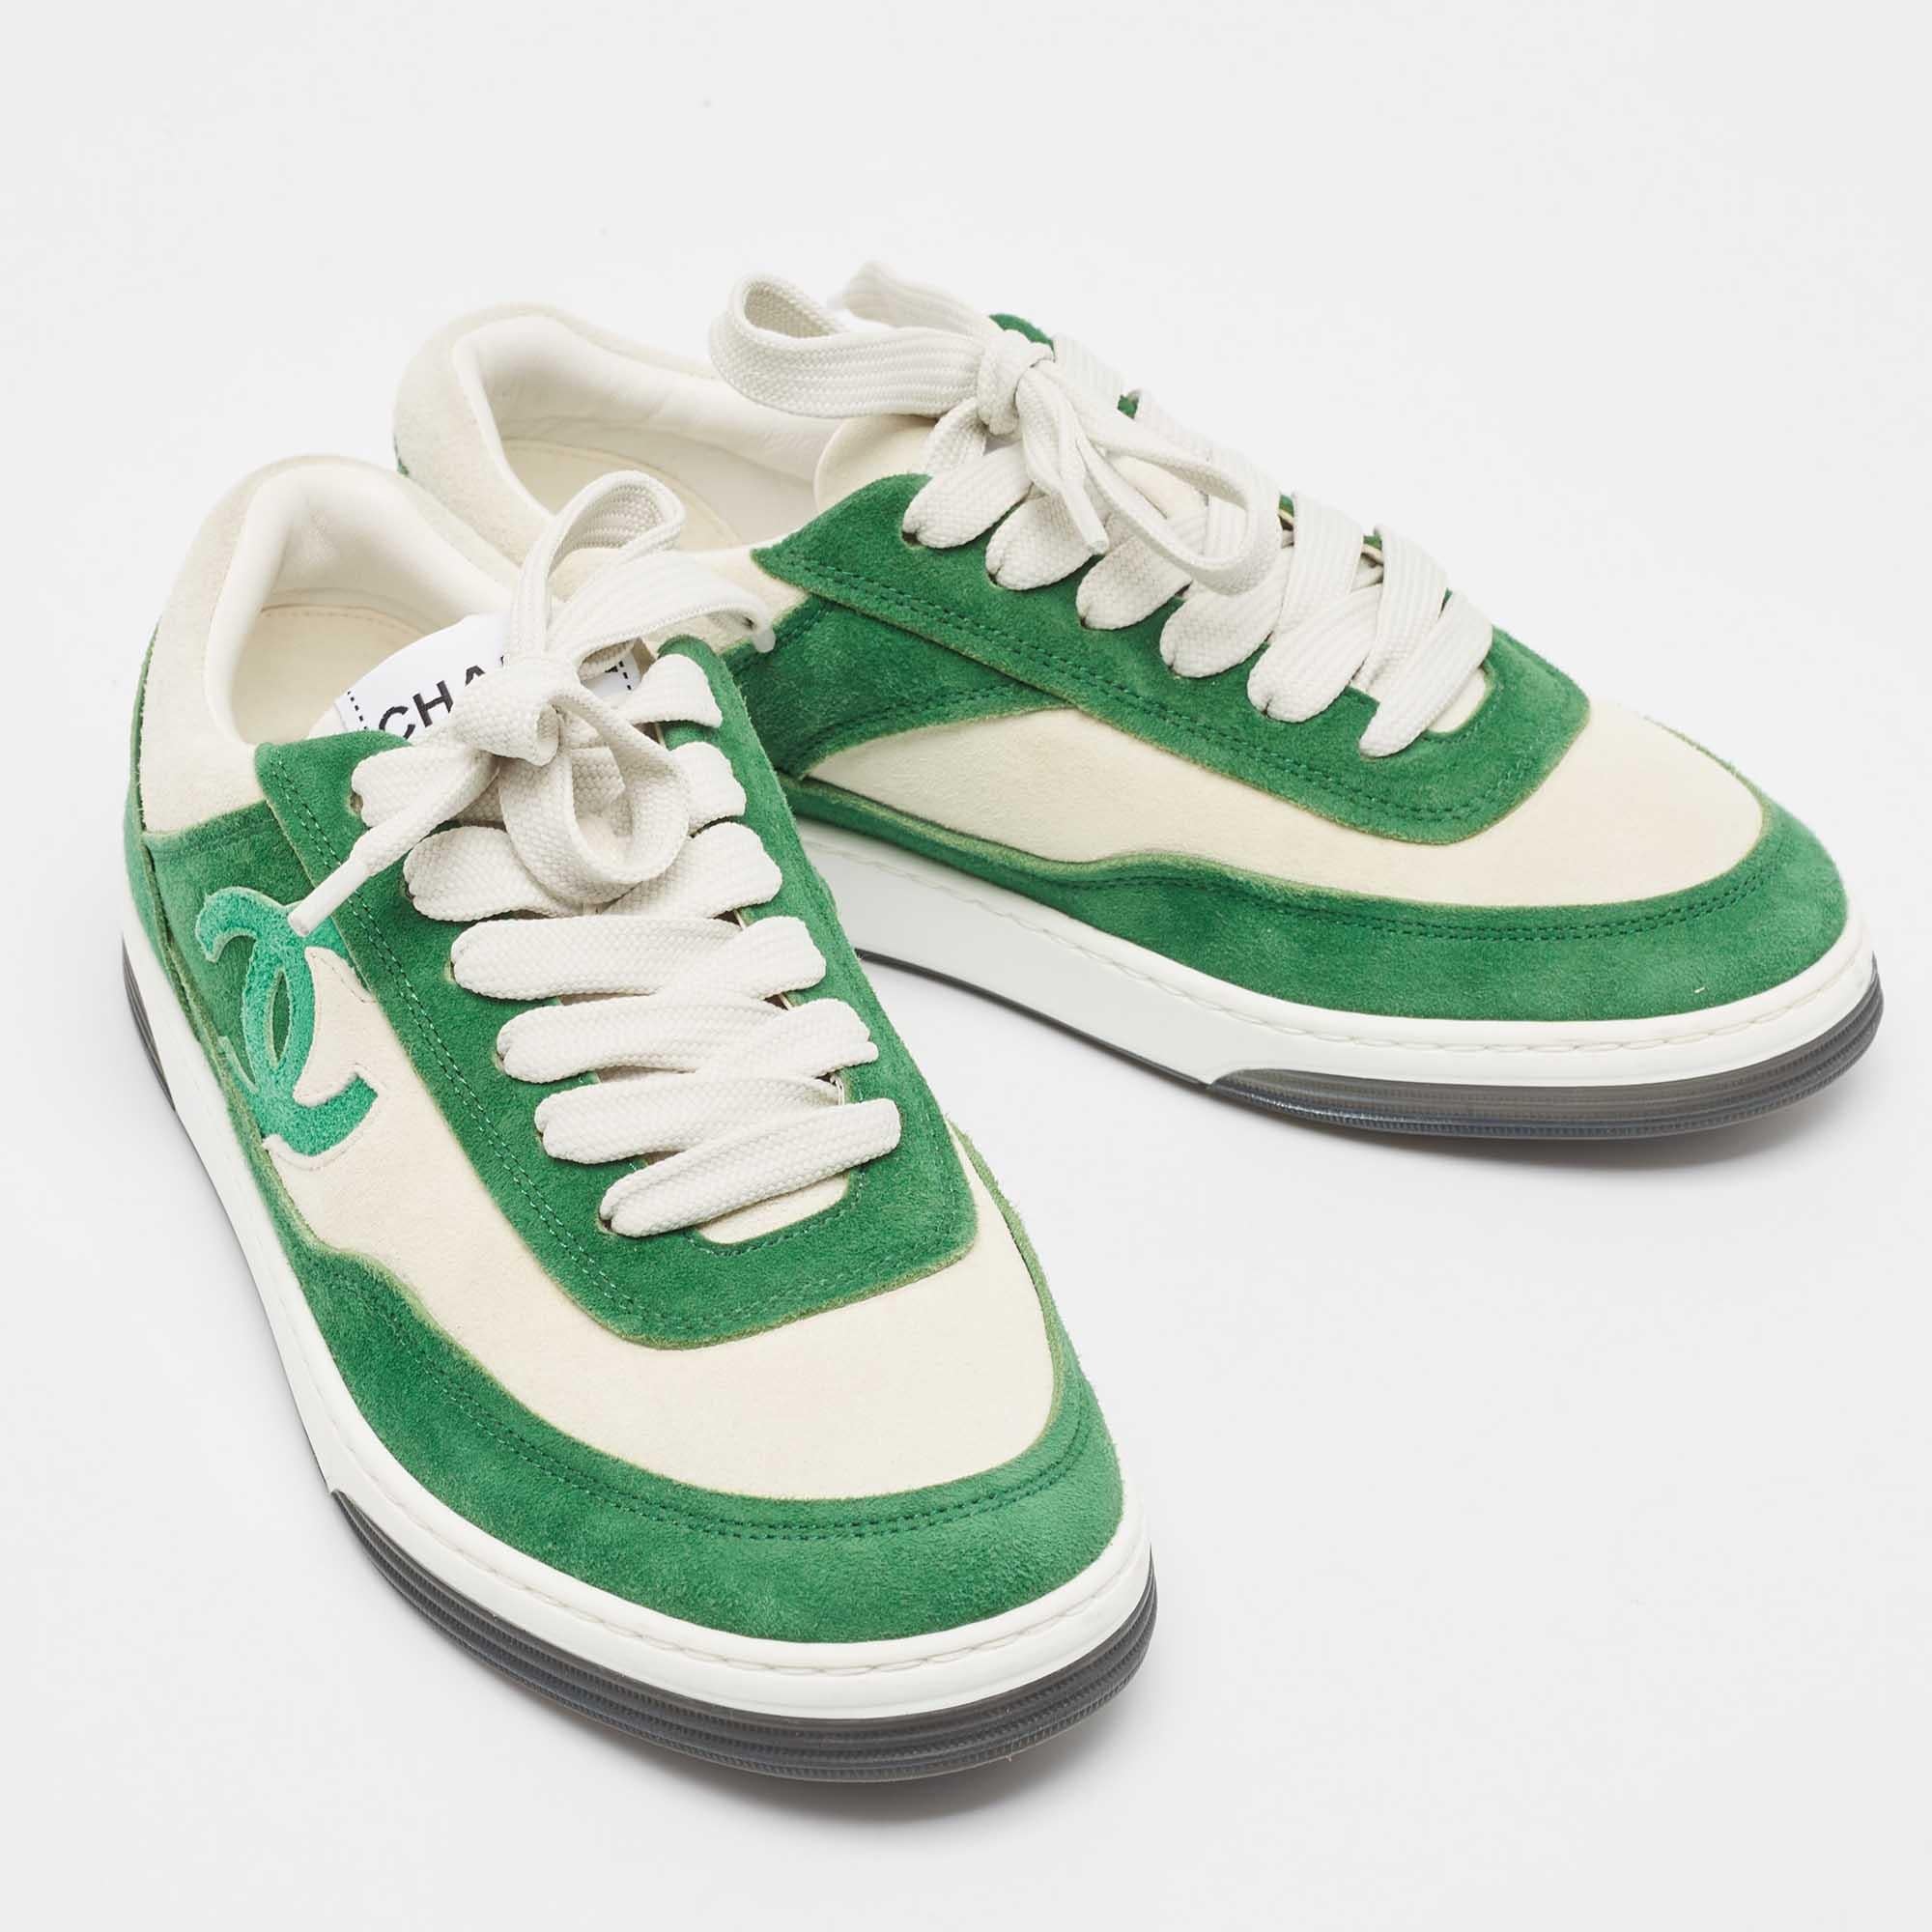 Chanel Green/White Suede CC Low Top Sneakers Size 37 In Good Condition For Sale In Dubai, Al Qouz 2